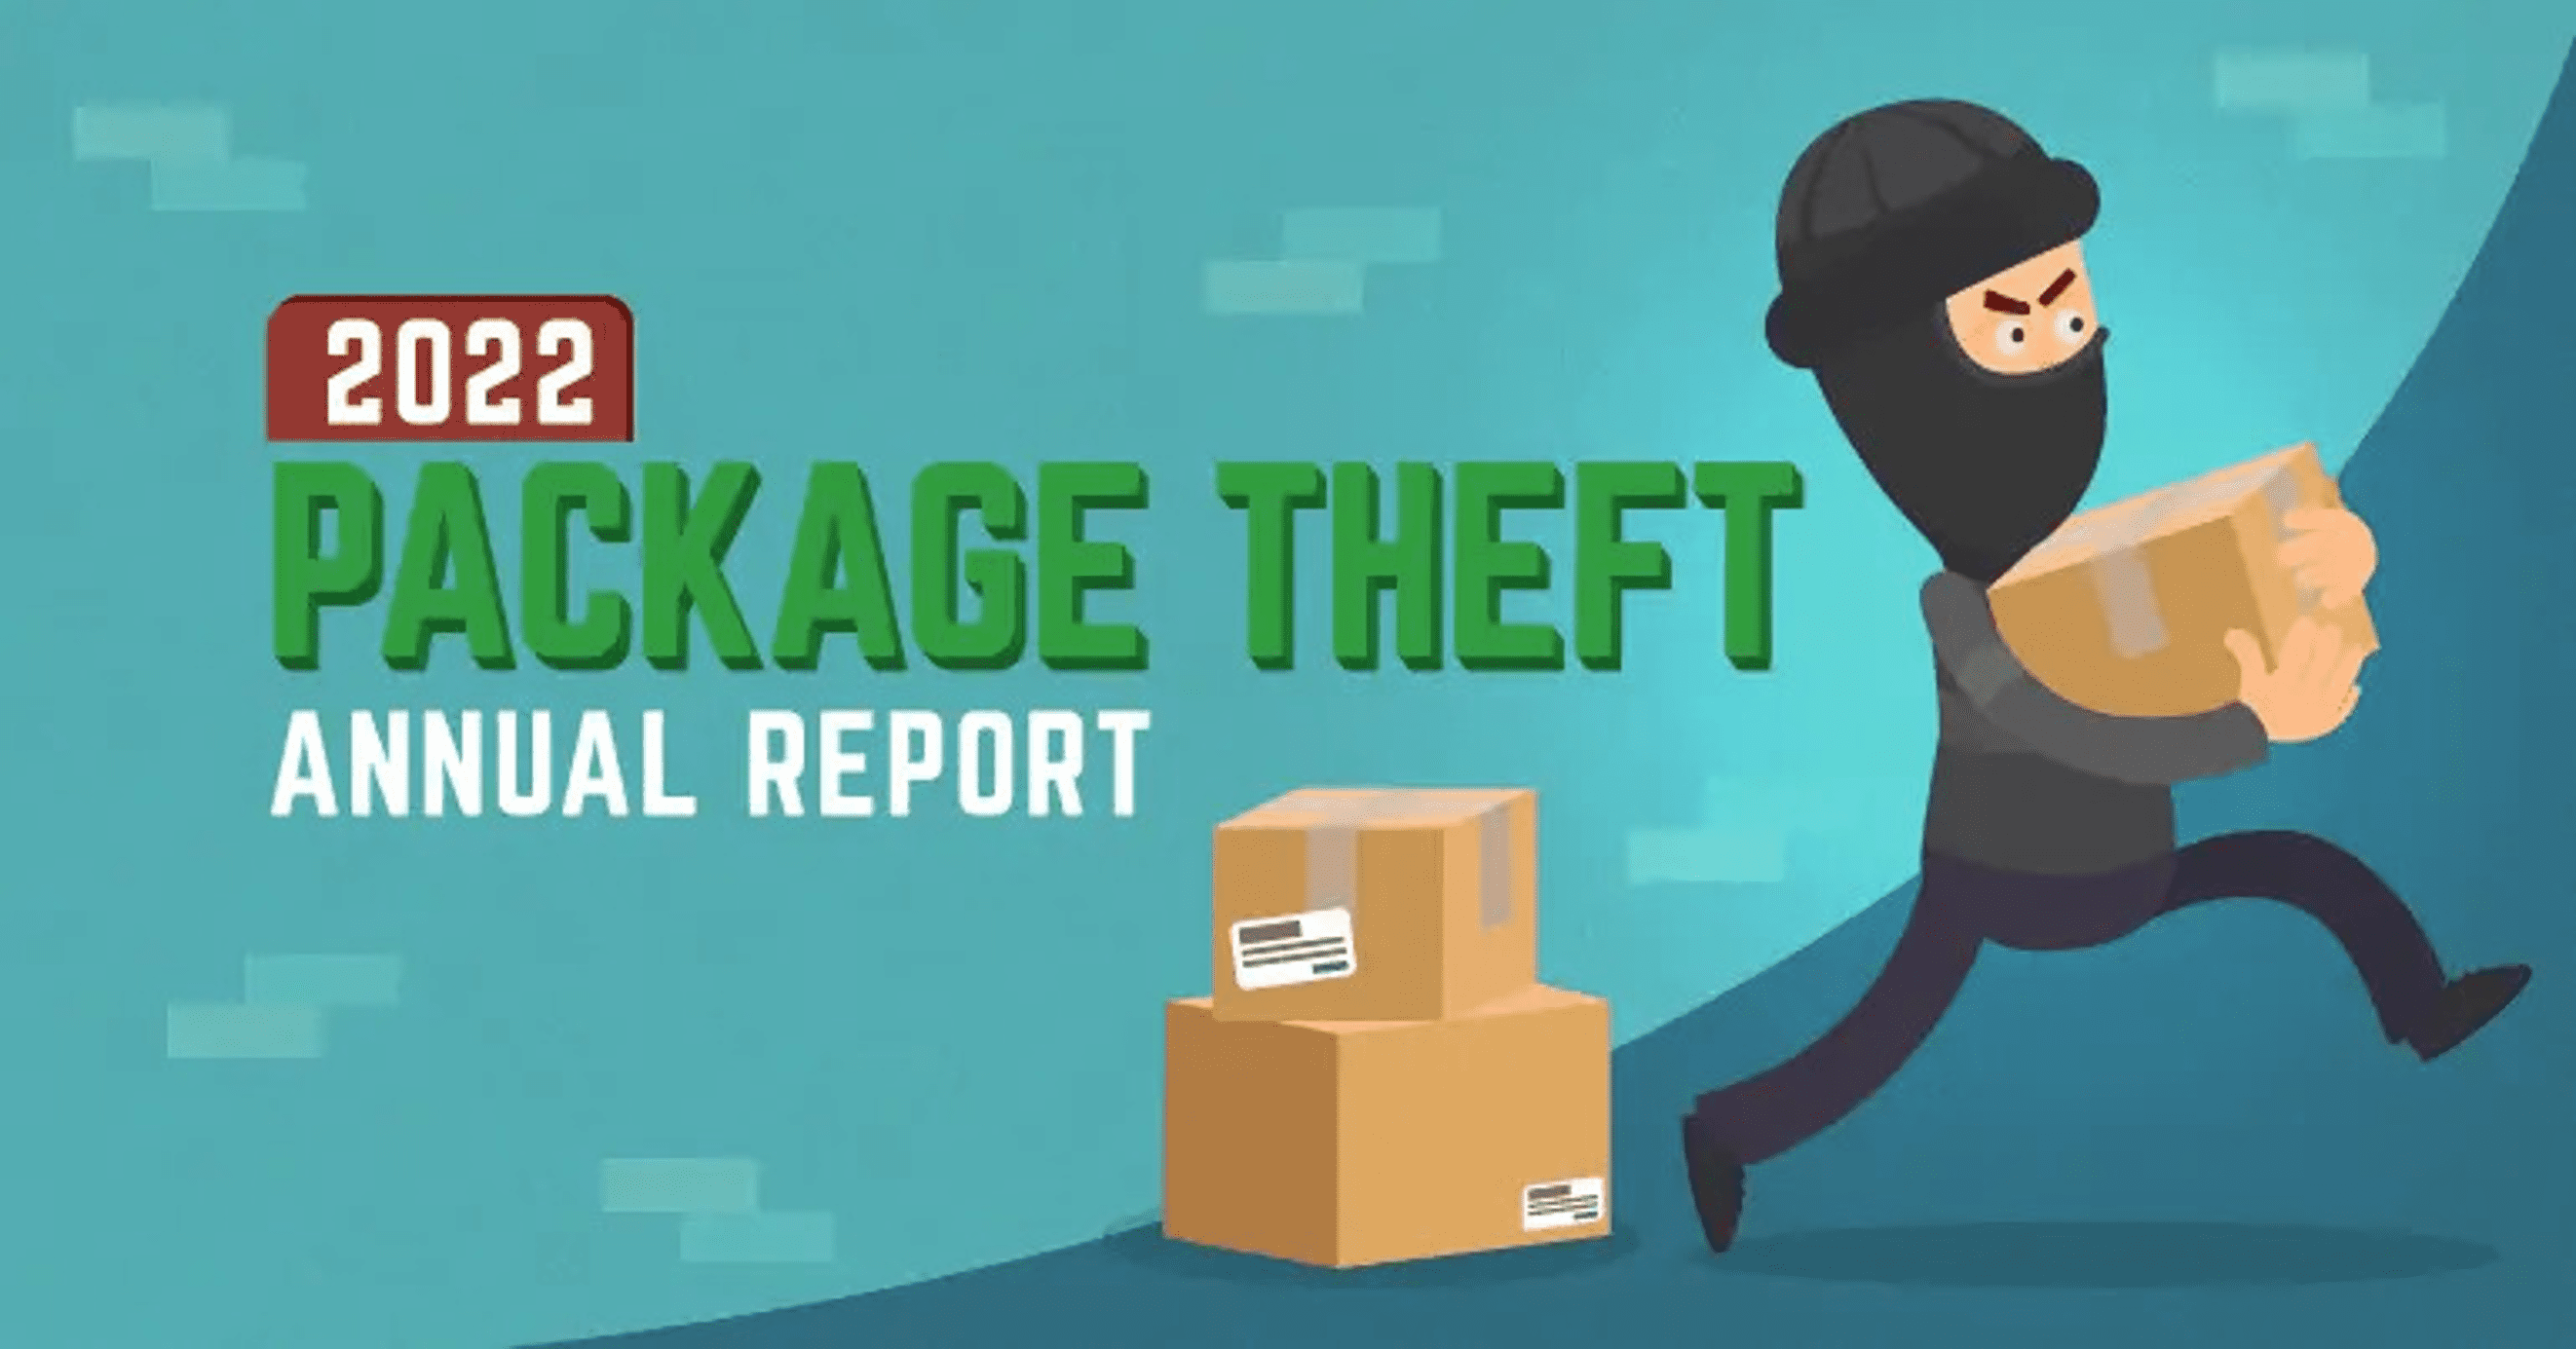 2022 Package Theft Annual Report